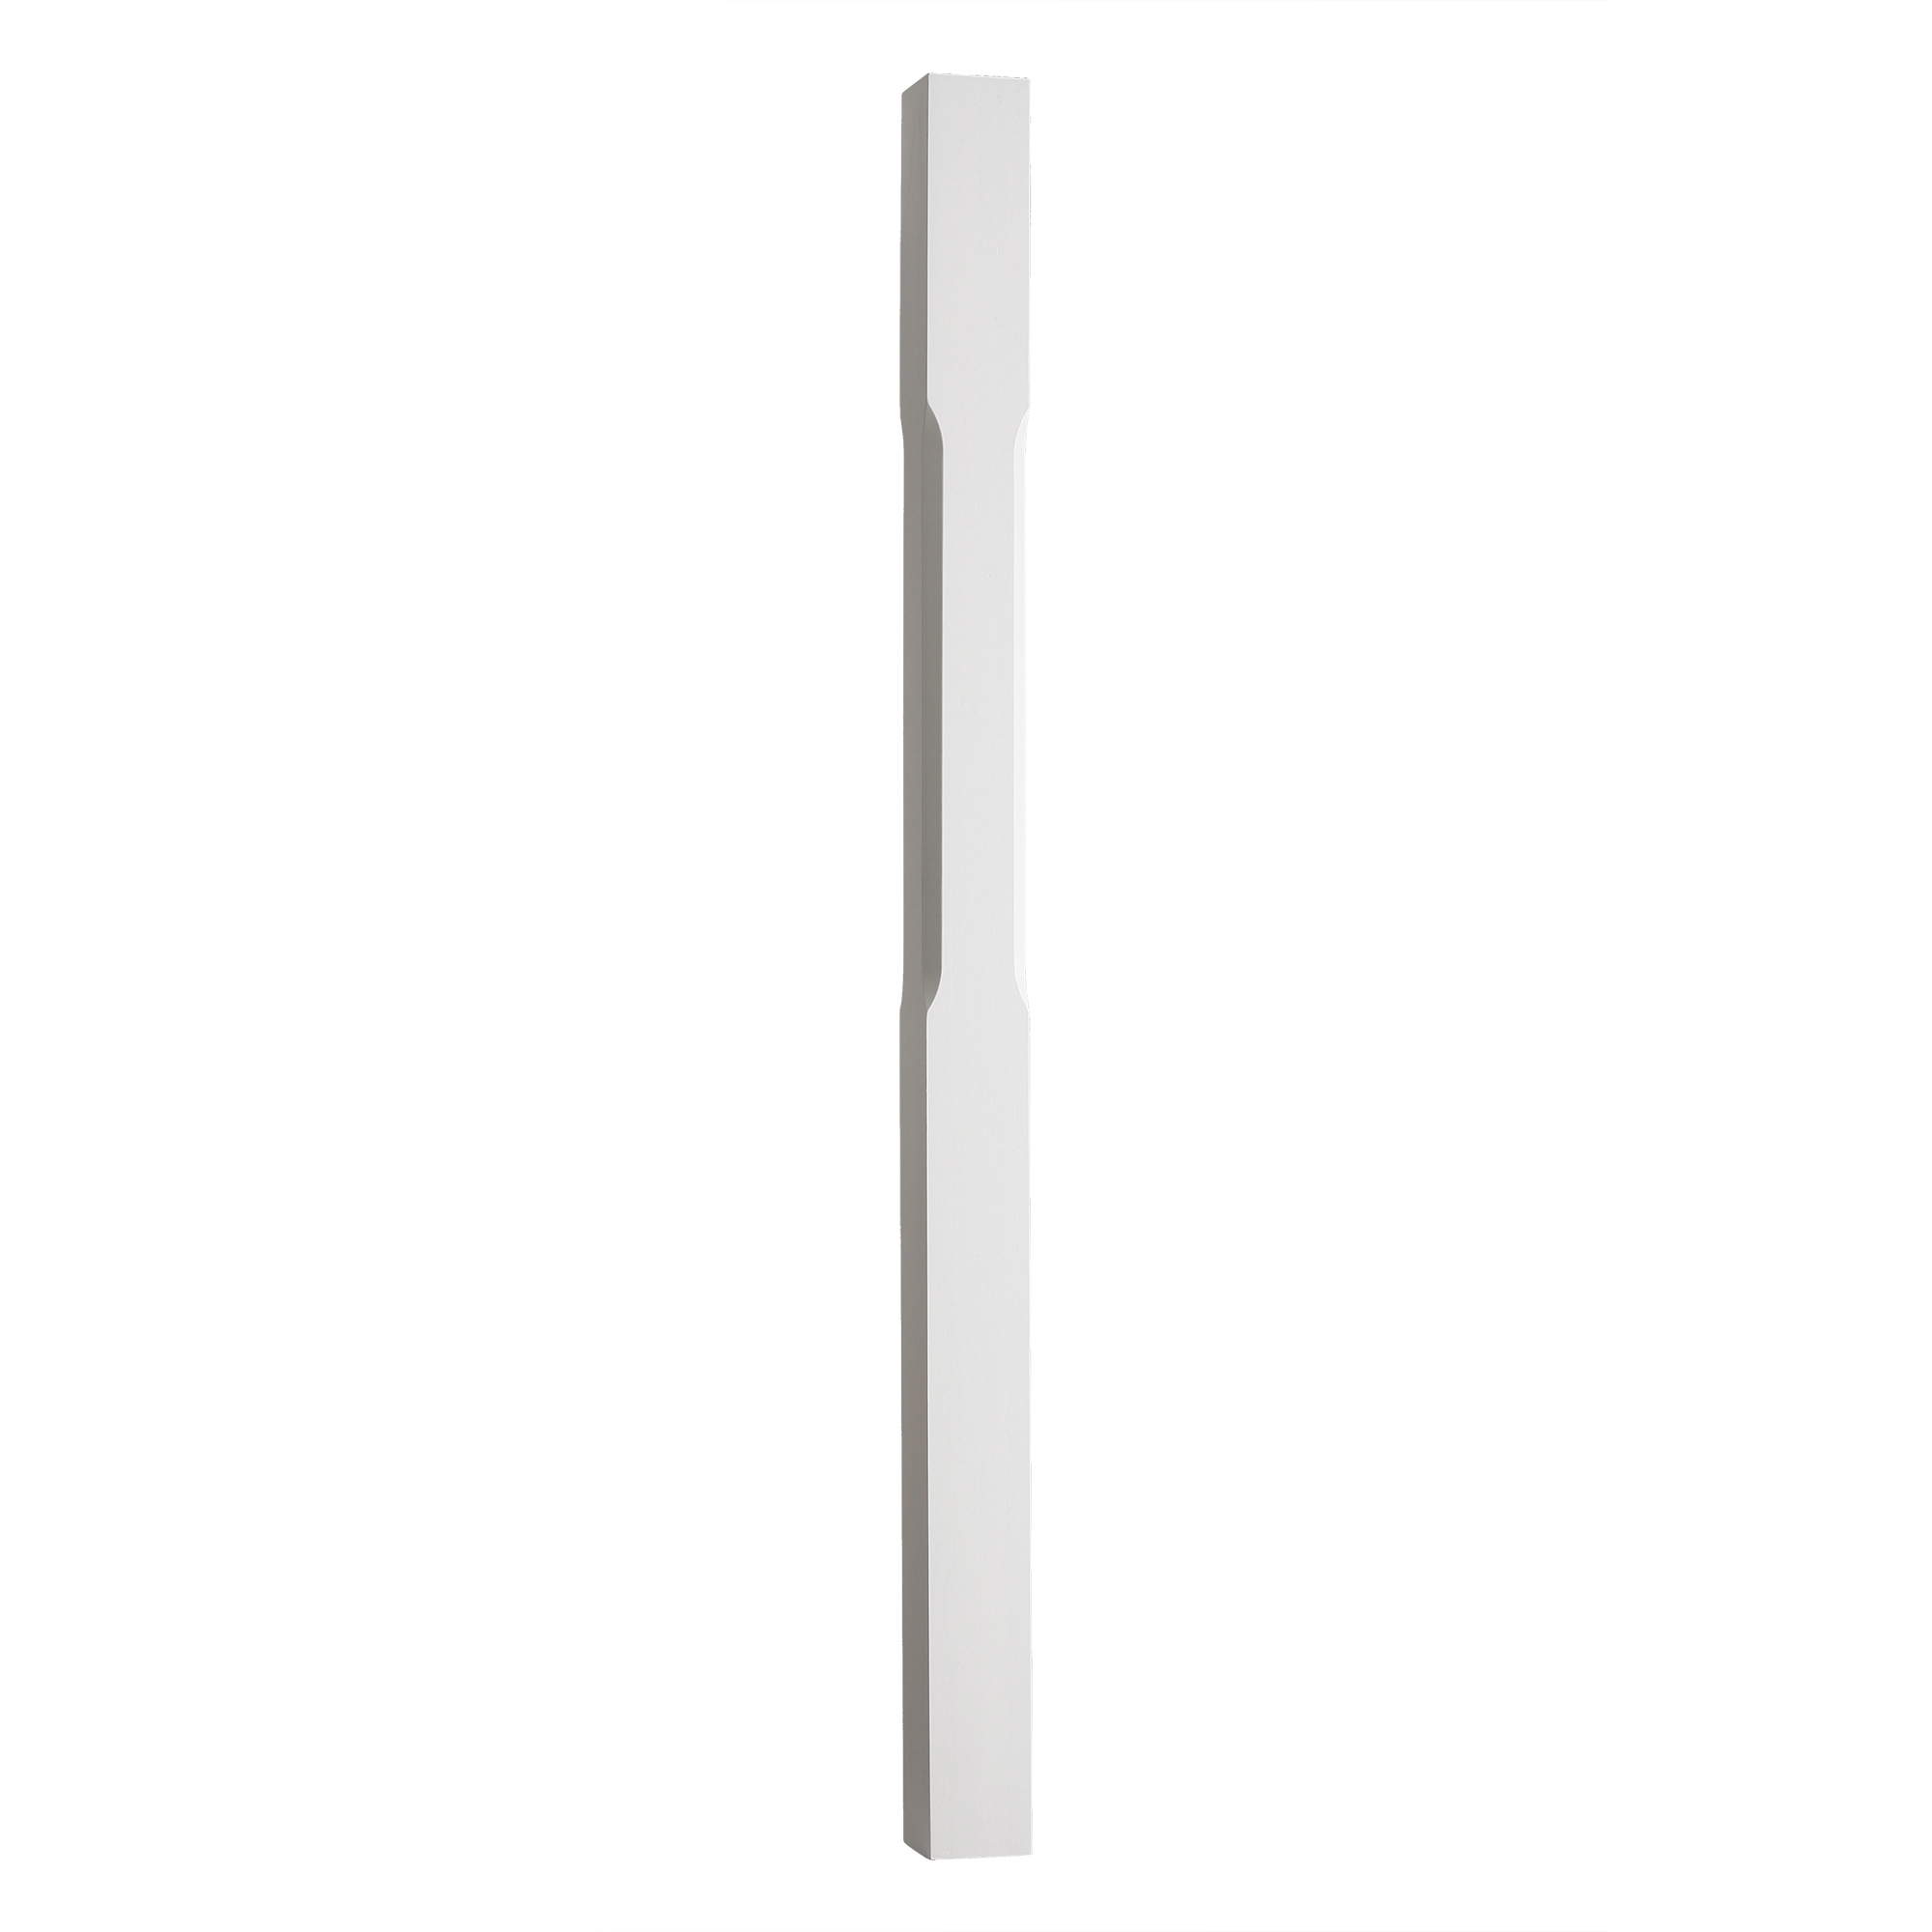 Image of Wickes Primed Chamfered Newel 1500 x 90 x 90mm